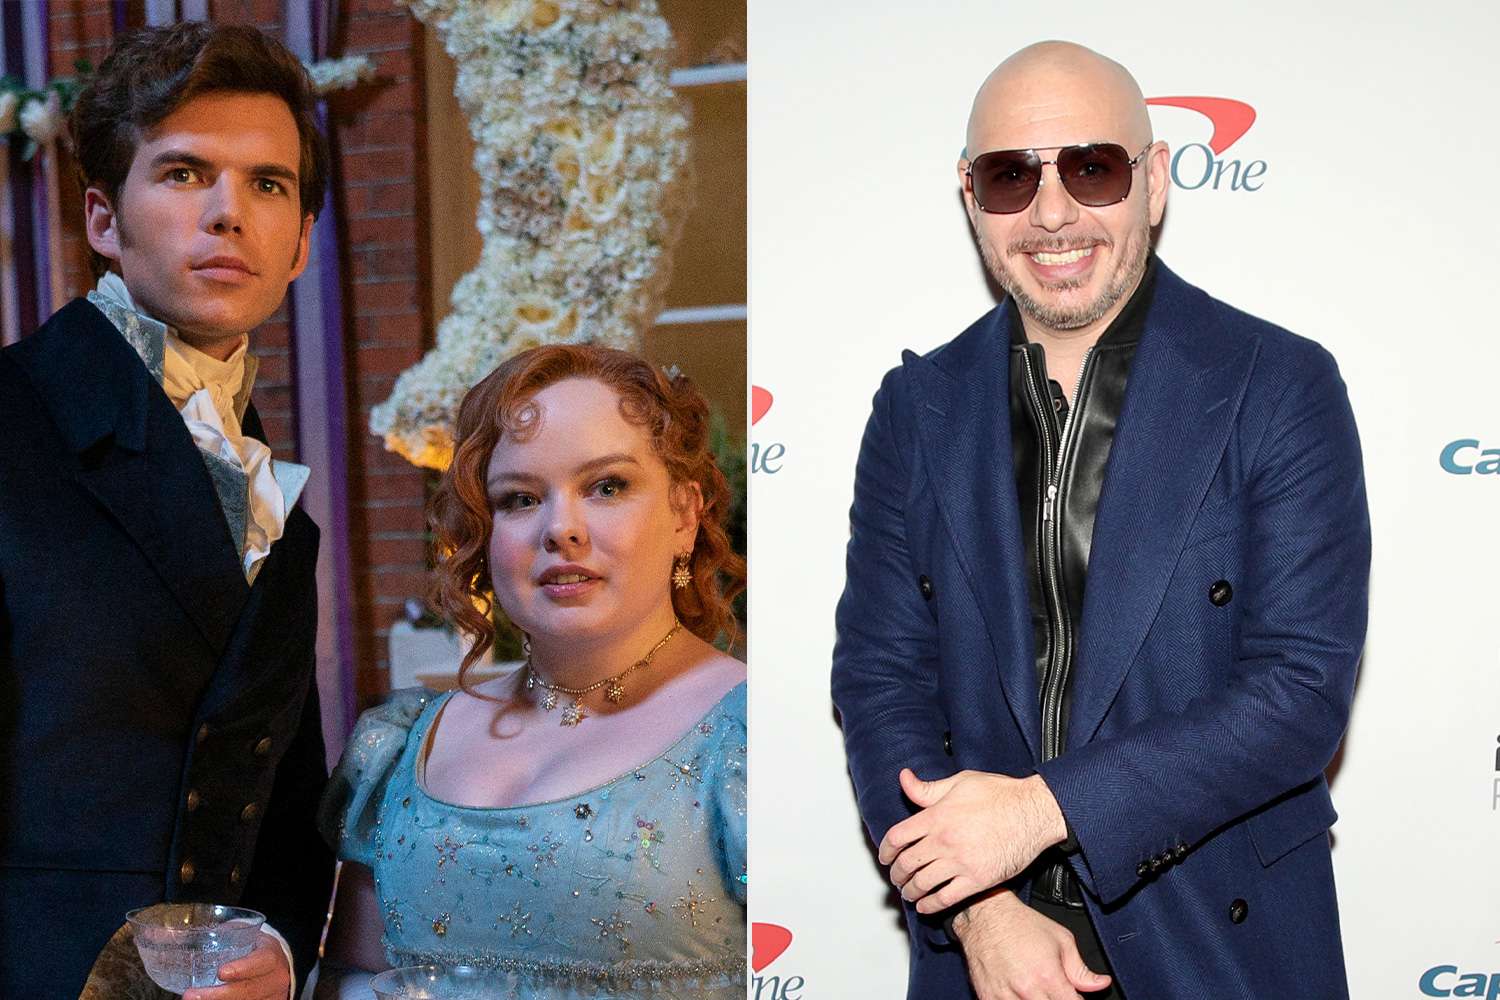 Pitbull loves that 'Bridgerton' used his song for the carriage-banging scene